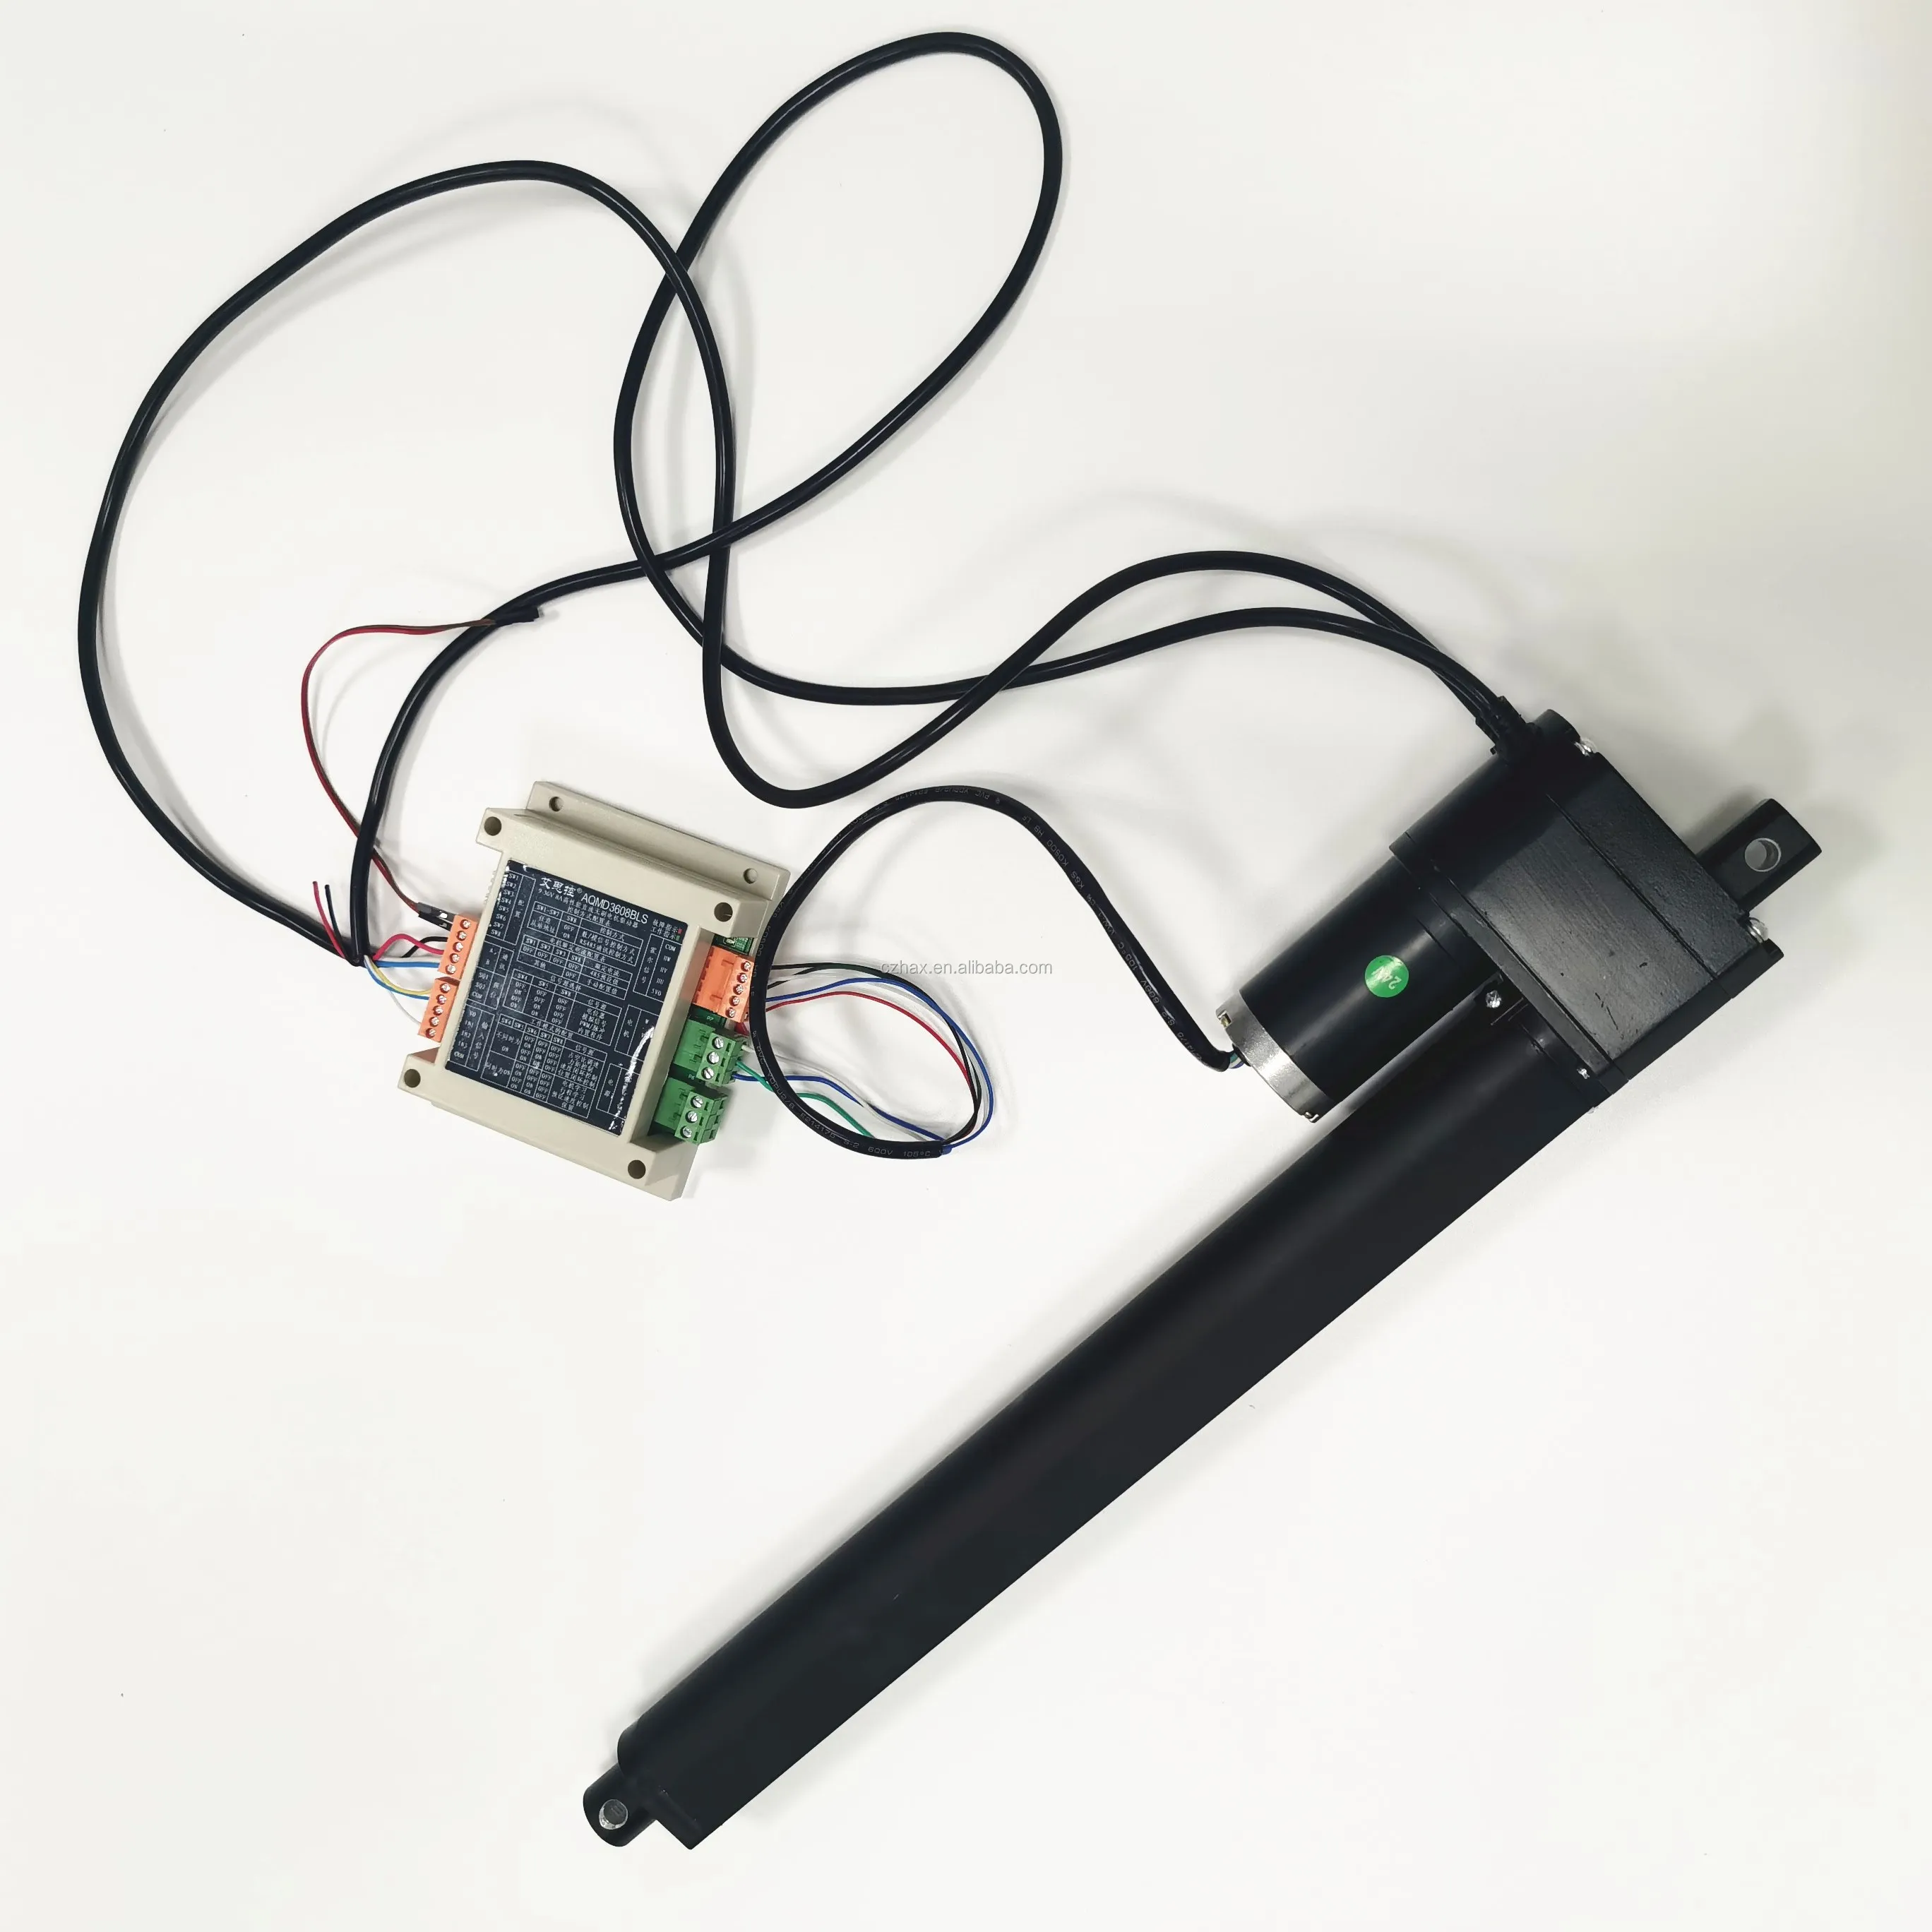 Hydraulic Linear Actuator With Limit Switch 24v 500mm Stroke Brushless Motor With Controller Buy Hydraulic Linear Actuator Linear Actuator With Limit Switch 24v Linear Actuator Product On Alibaba Com